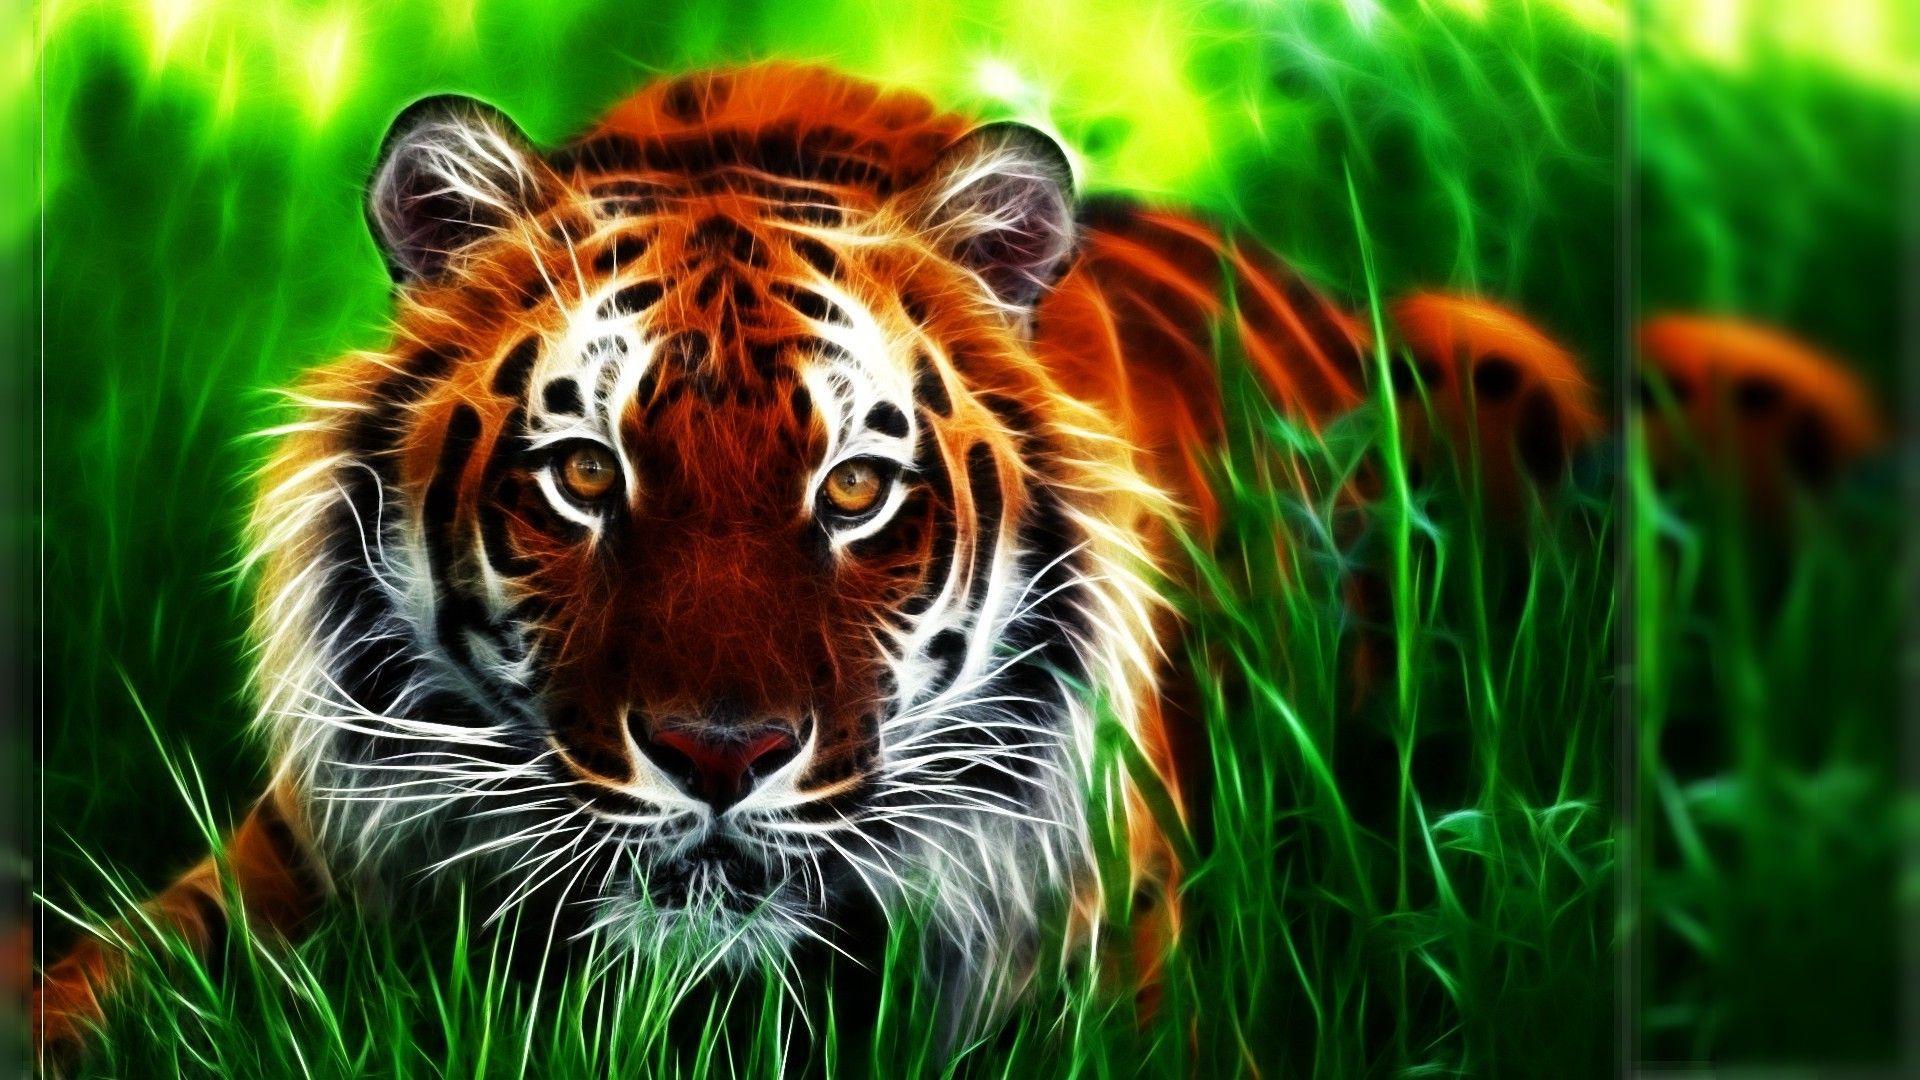 Animals HD Desktop Wallpapers for Widescreen, High Definition, Mobile |  Page 7 | Pet tiger, White tiger, Rainforest pictures